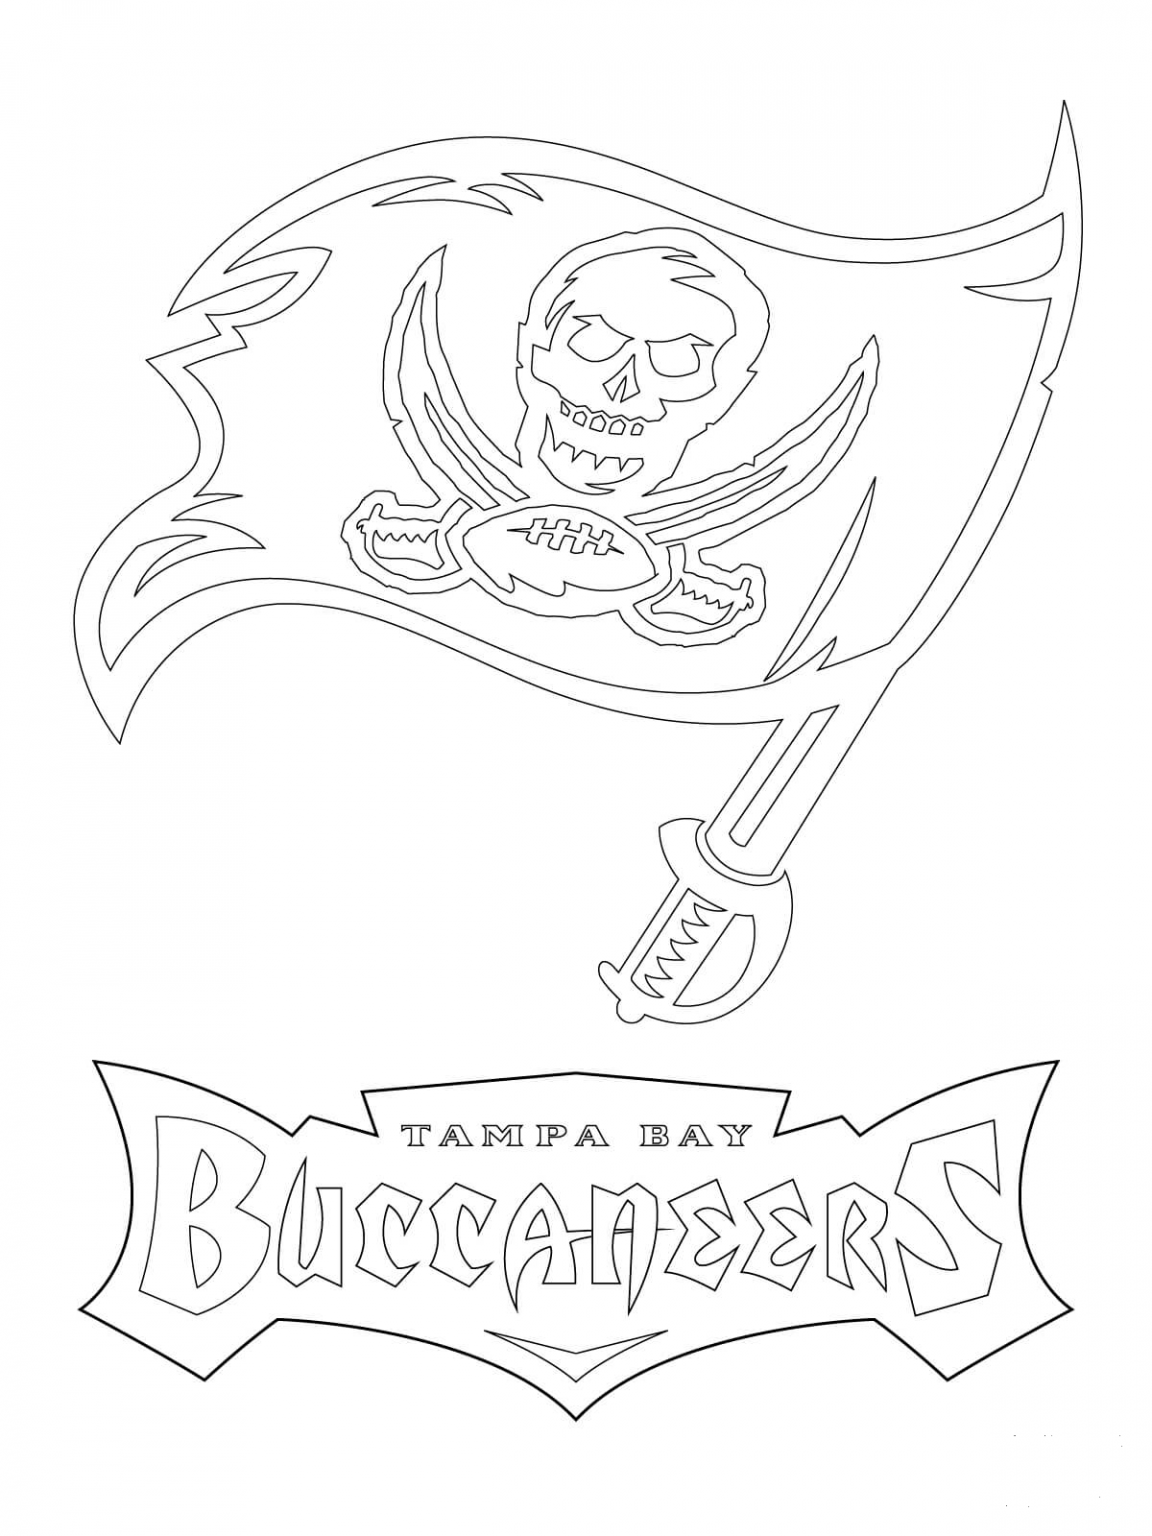 Tampa Bay Buccaneers Logo coloring page - ColouringPages